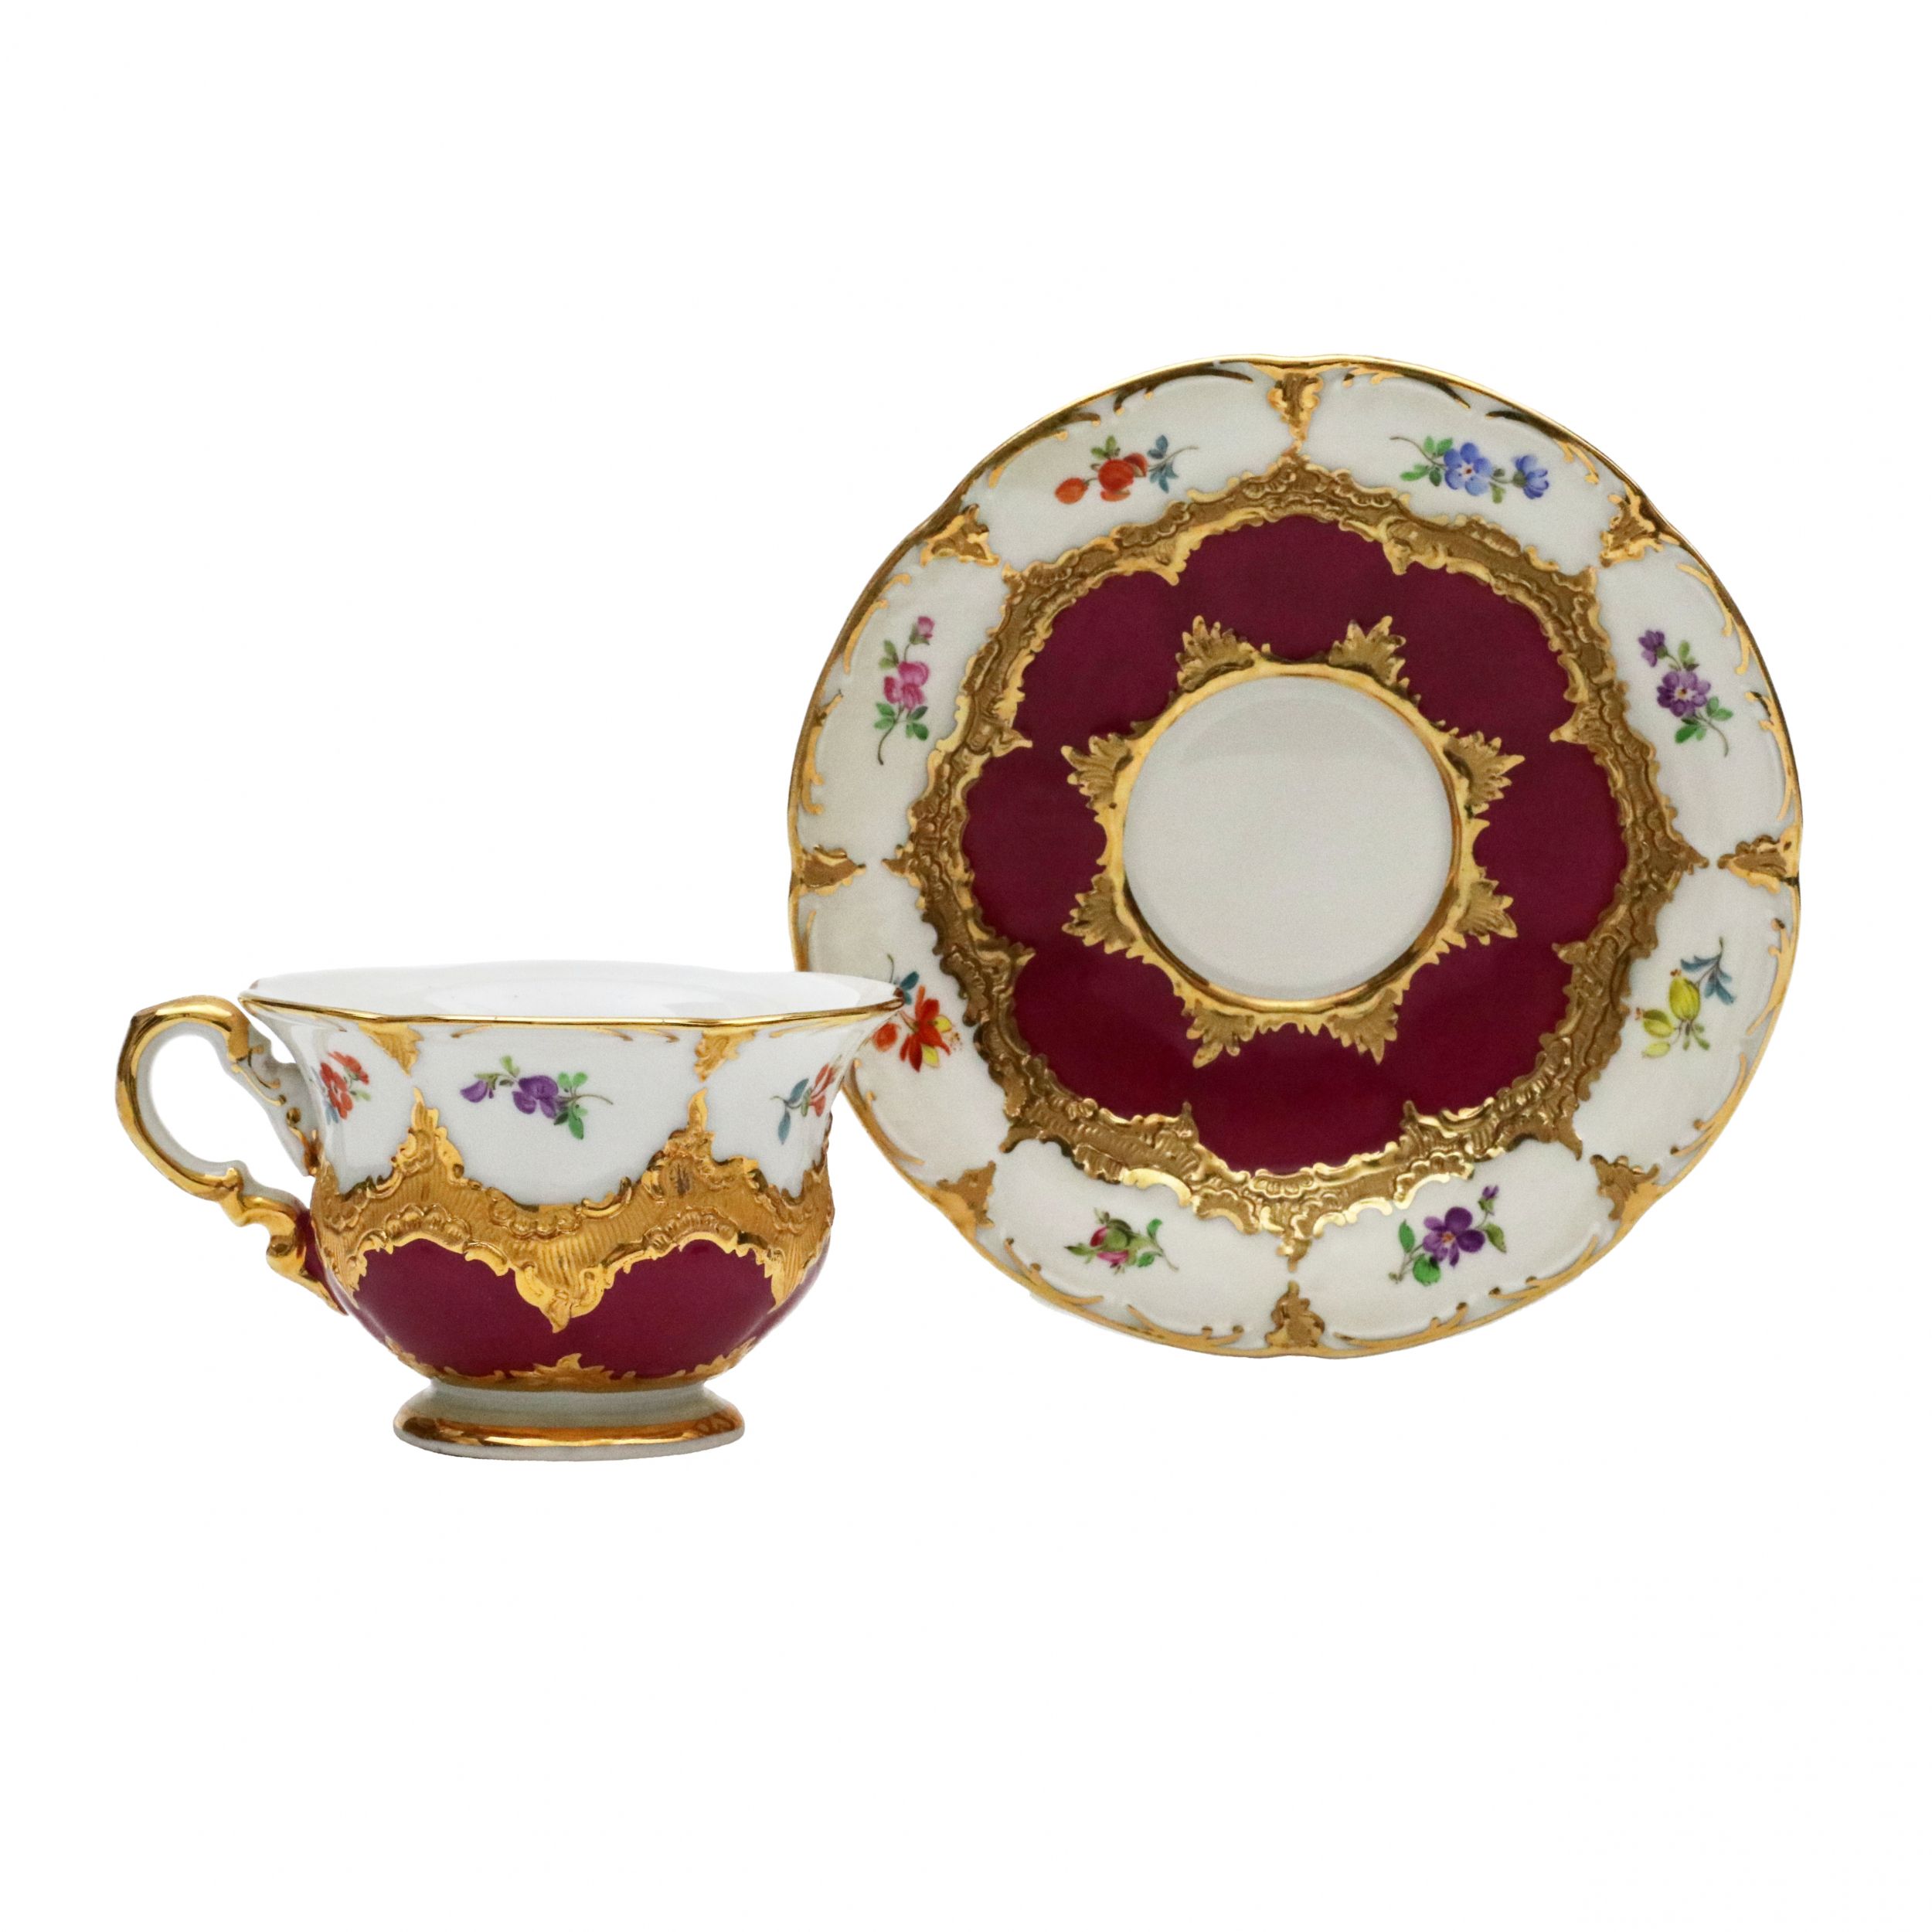 Meissen. B-Form mocha coffee service for 6 persons. - Image 7 of 8